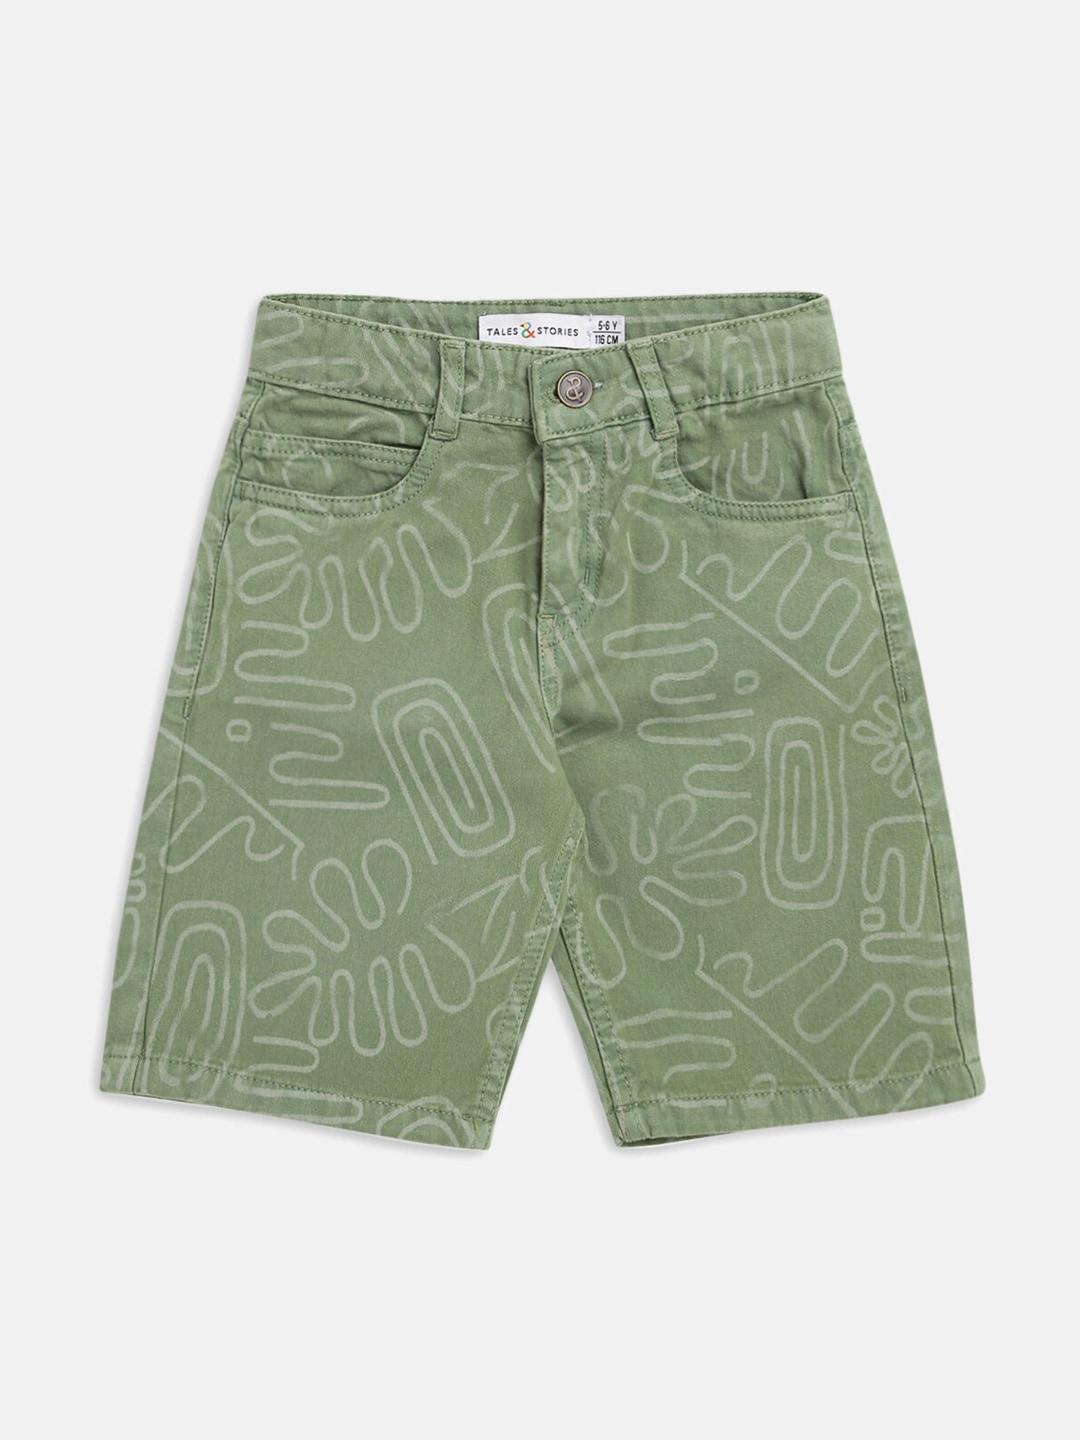 tales-&-stories-boys-abstract-printed-cotton-shorts